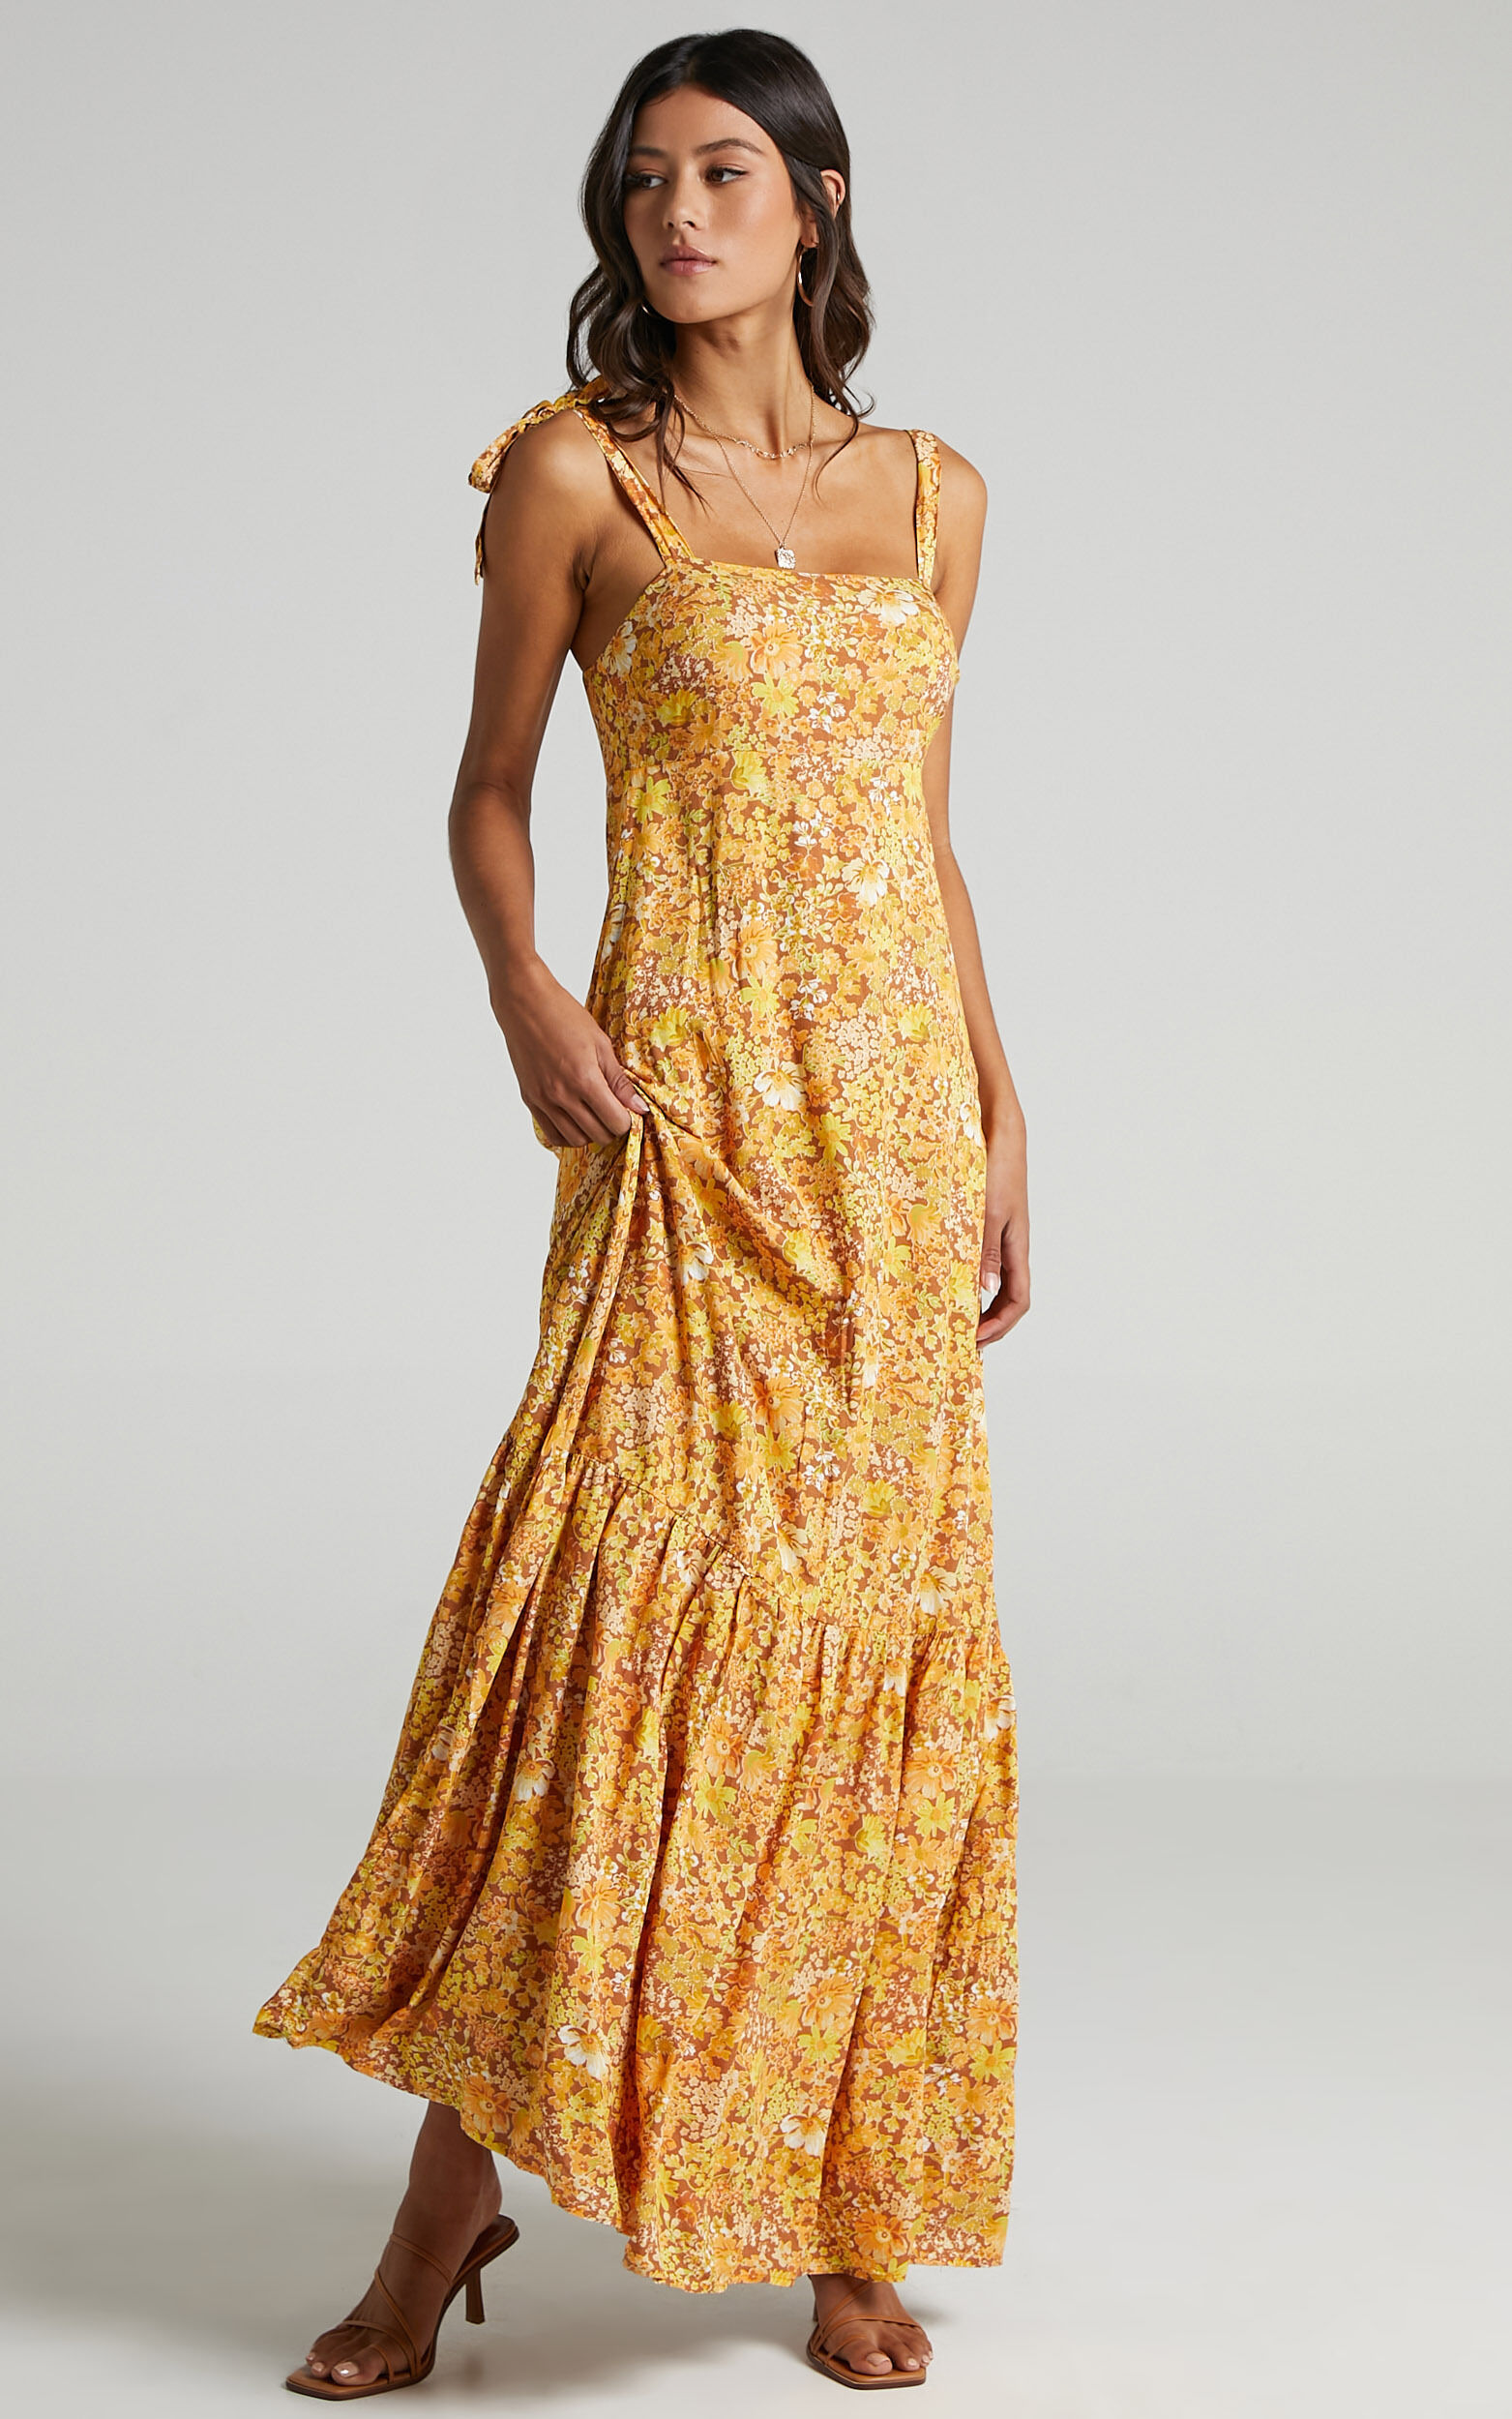 Honor Dress in Rustic Floral - 6 (XS), Mustard, super-hi-res image number null